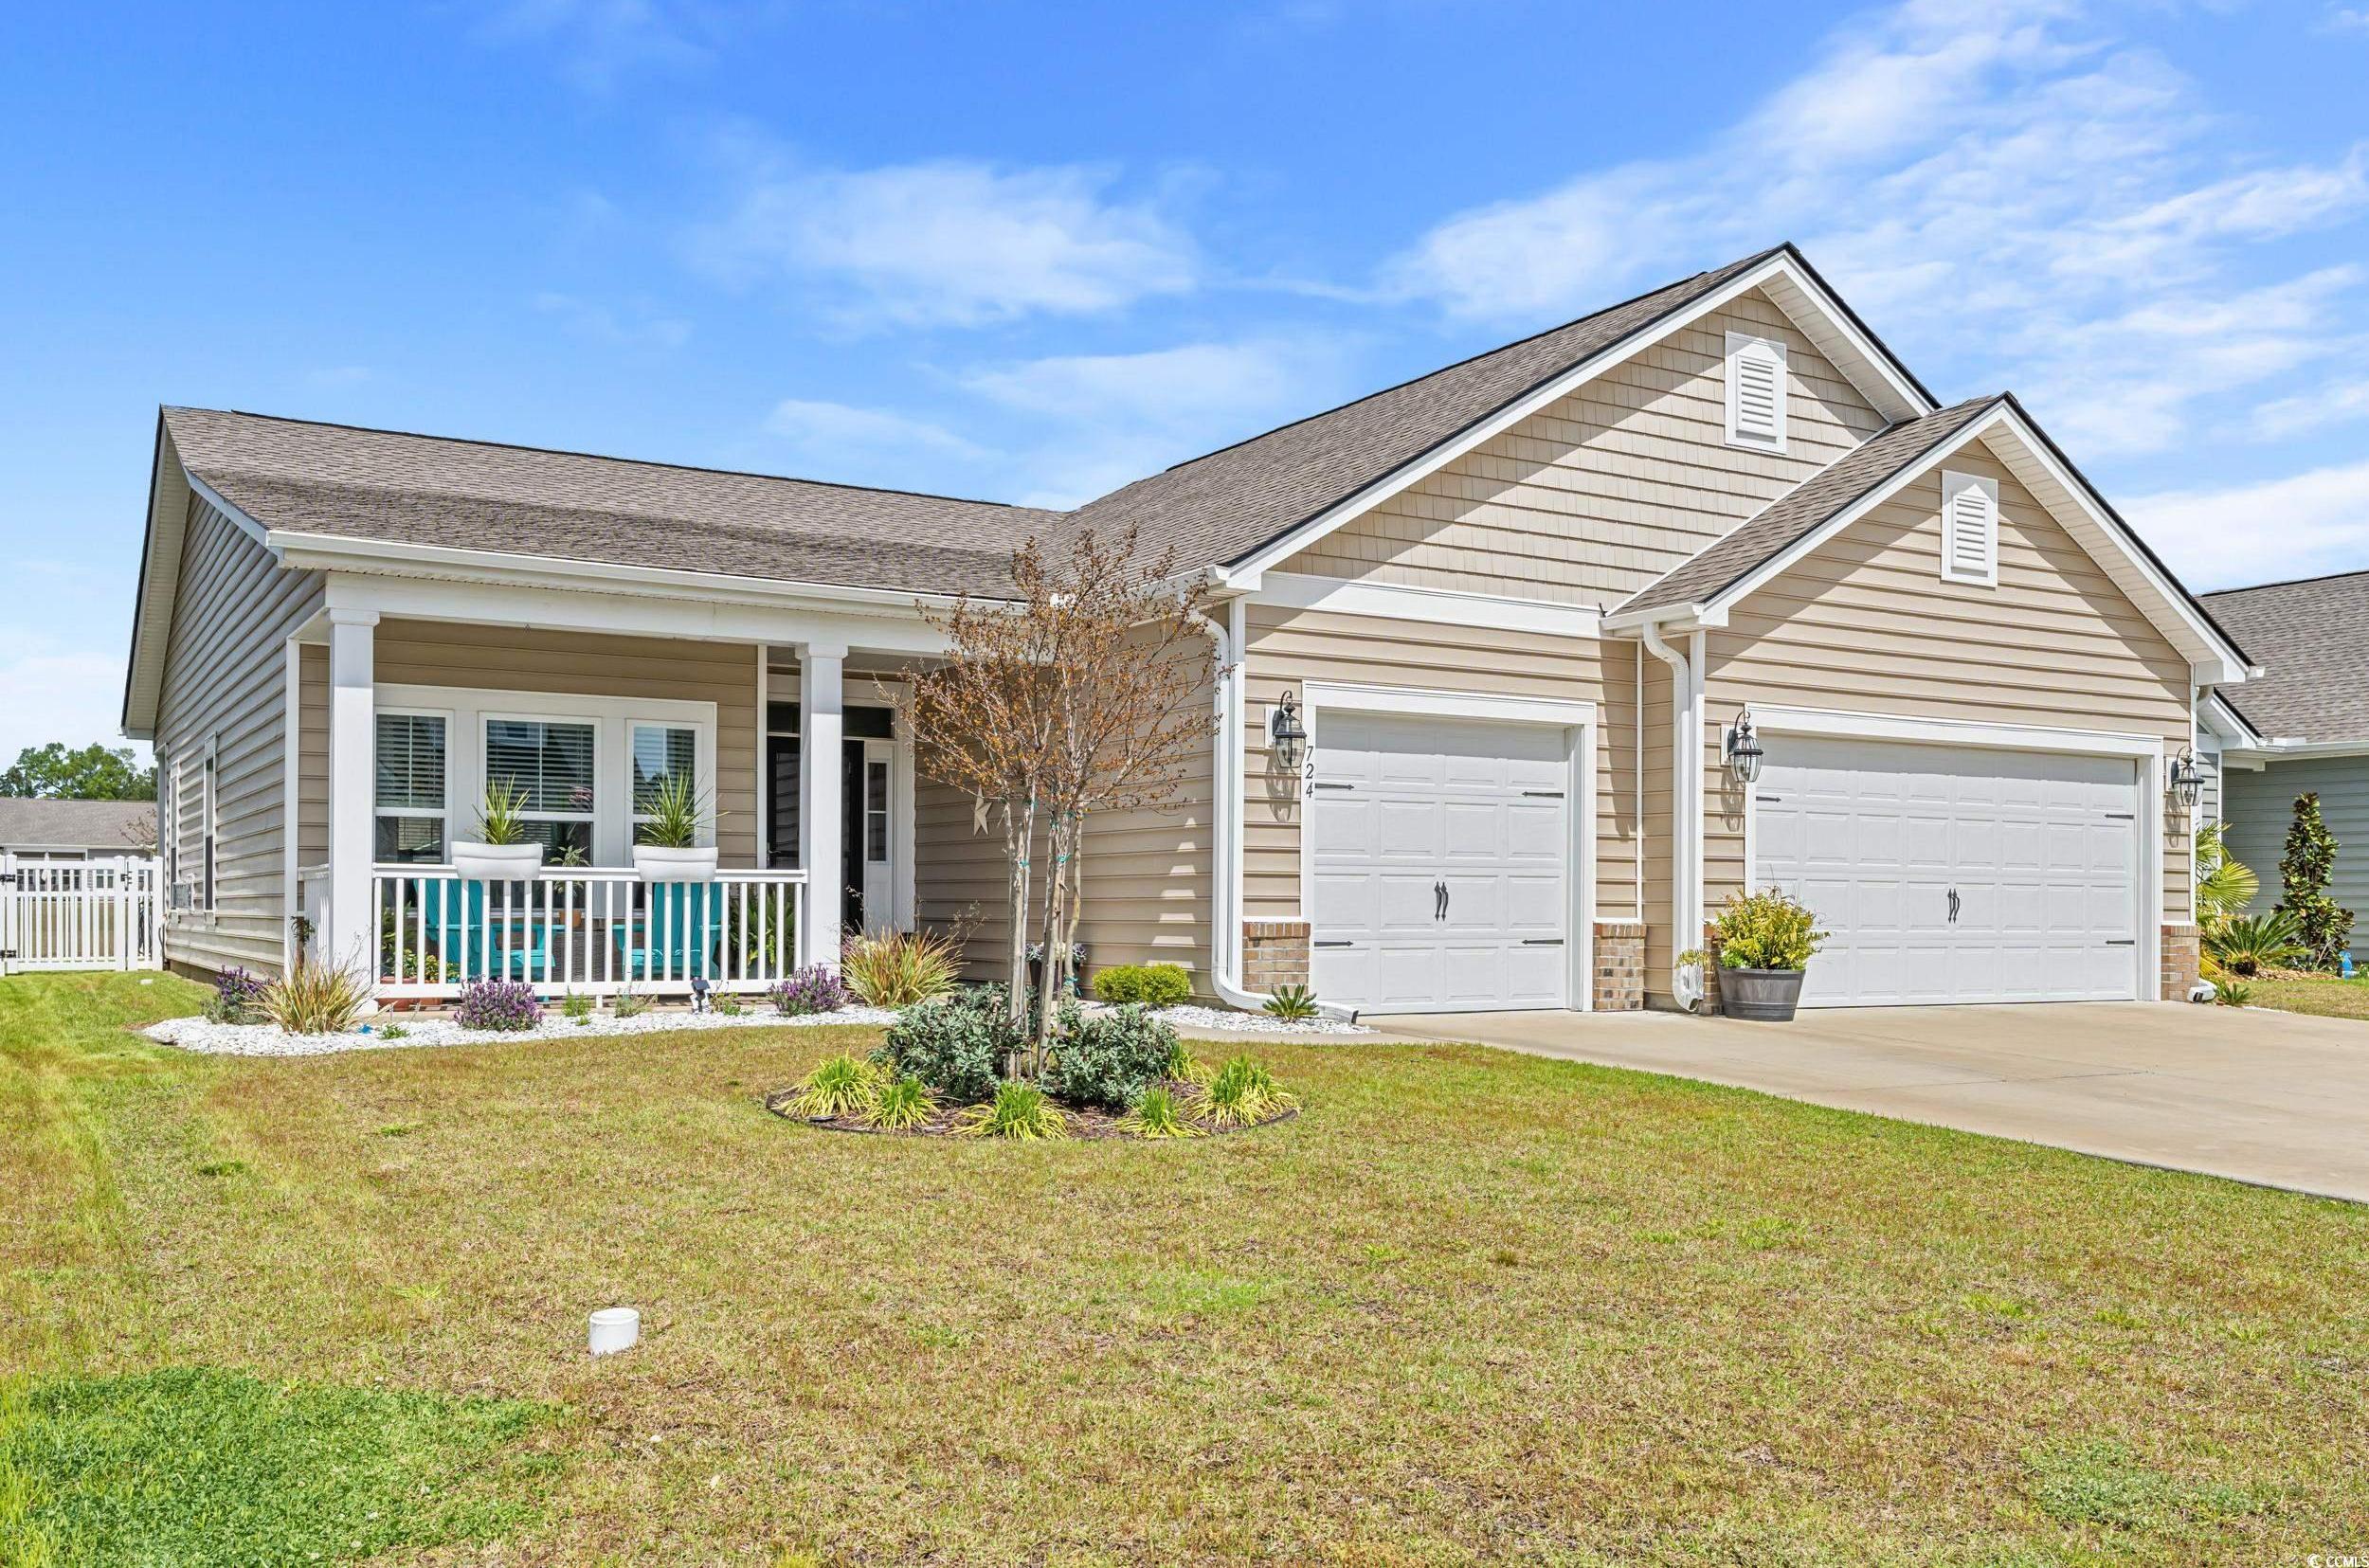 Photo one of 724 Little Fawn Way Myrtle Beach SC 29588 | MLS 2407449